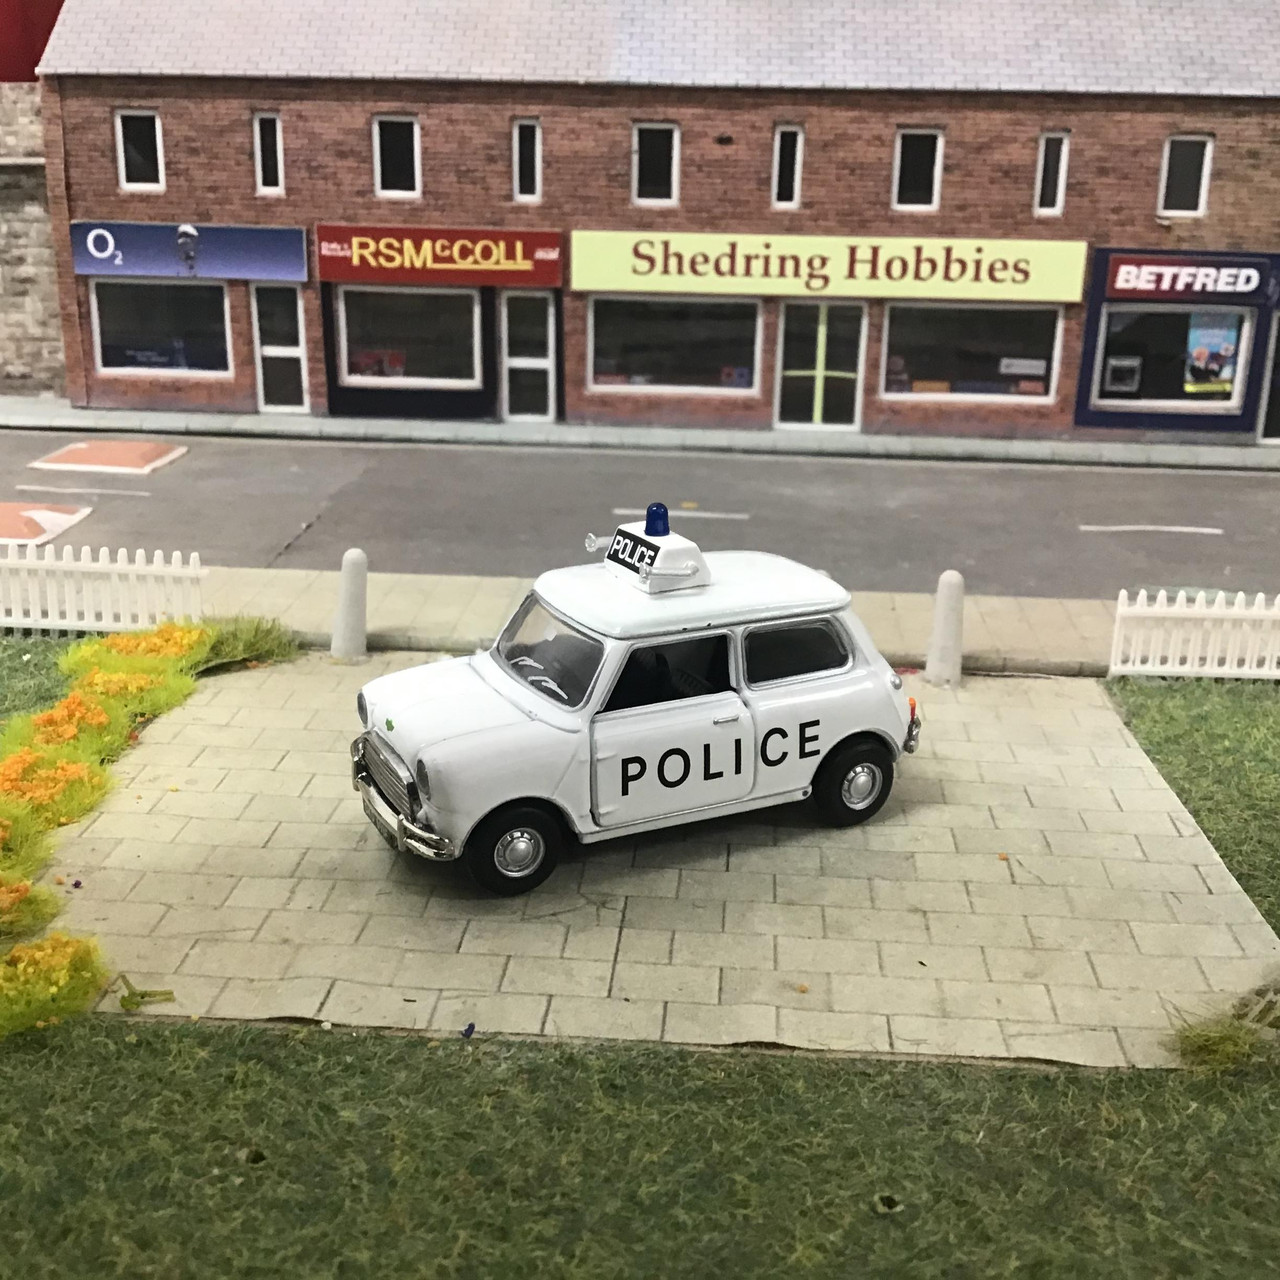 1/50 1963 Mini Cooper MK11 Liverpool and Bootle Police Tiny HK